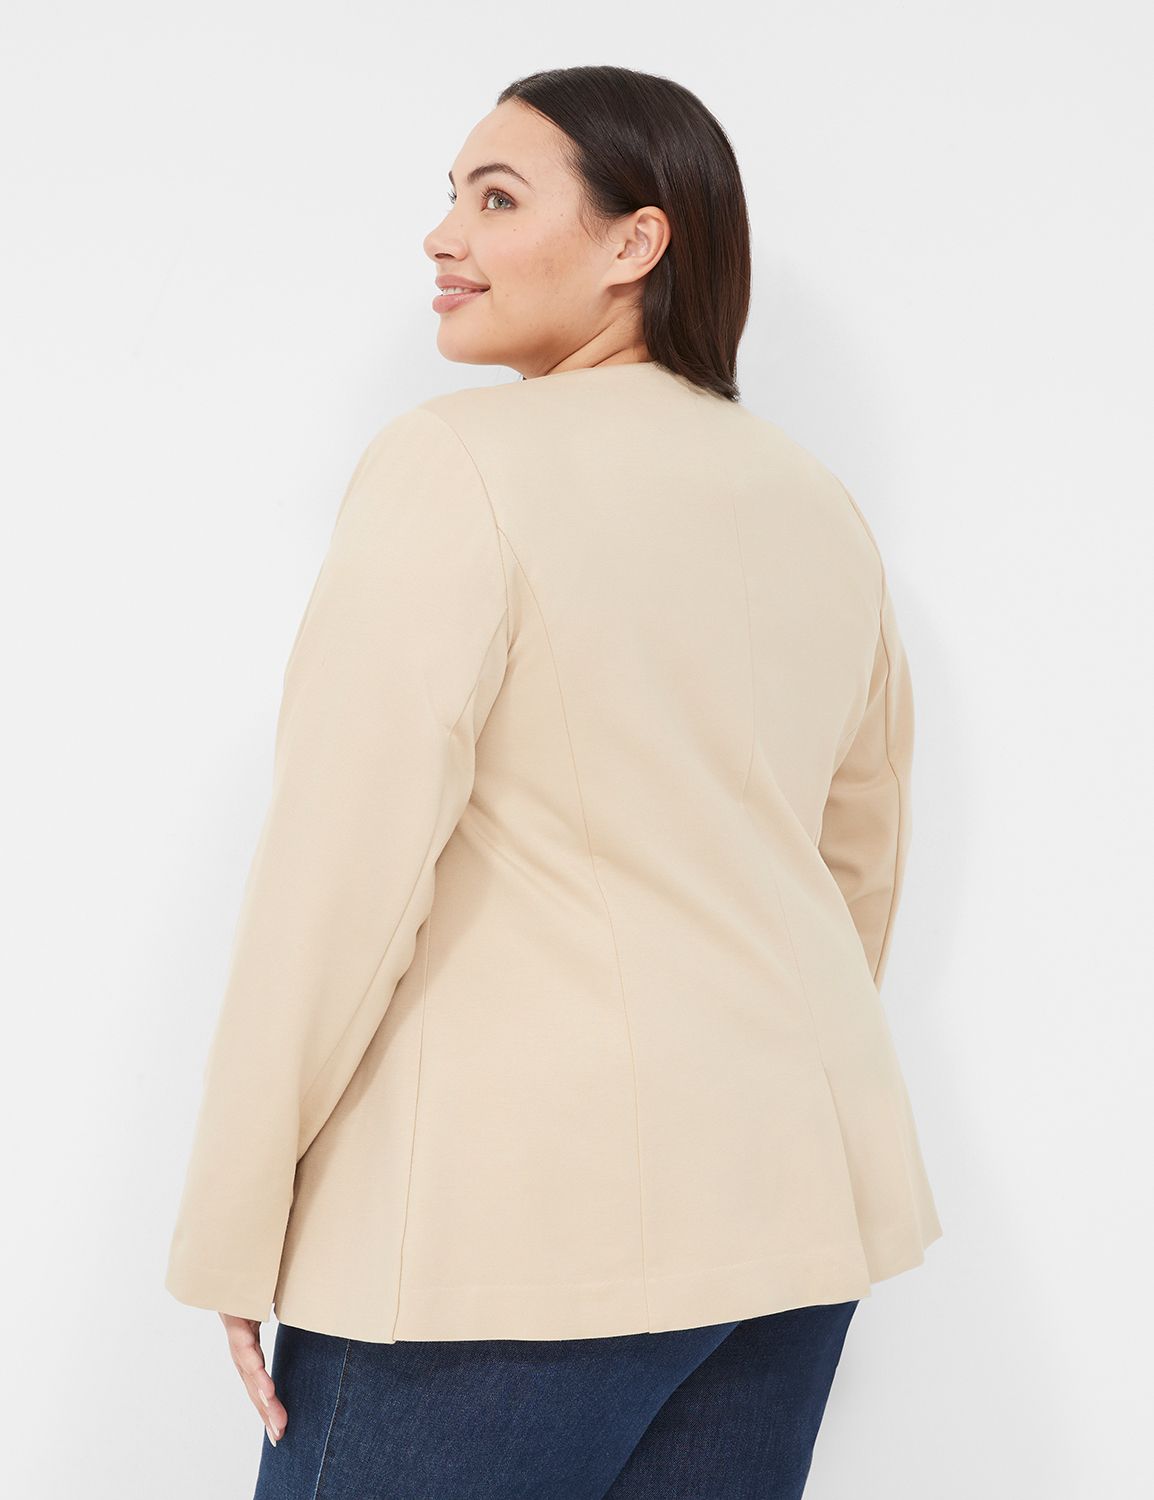 Business Casual for Plus Size Women - Everyday Savvy